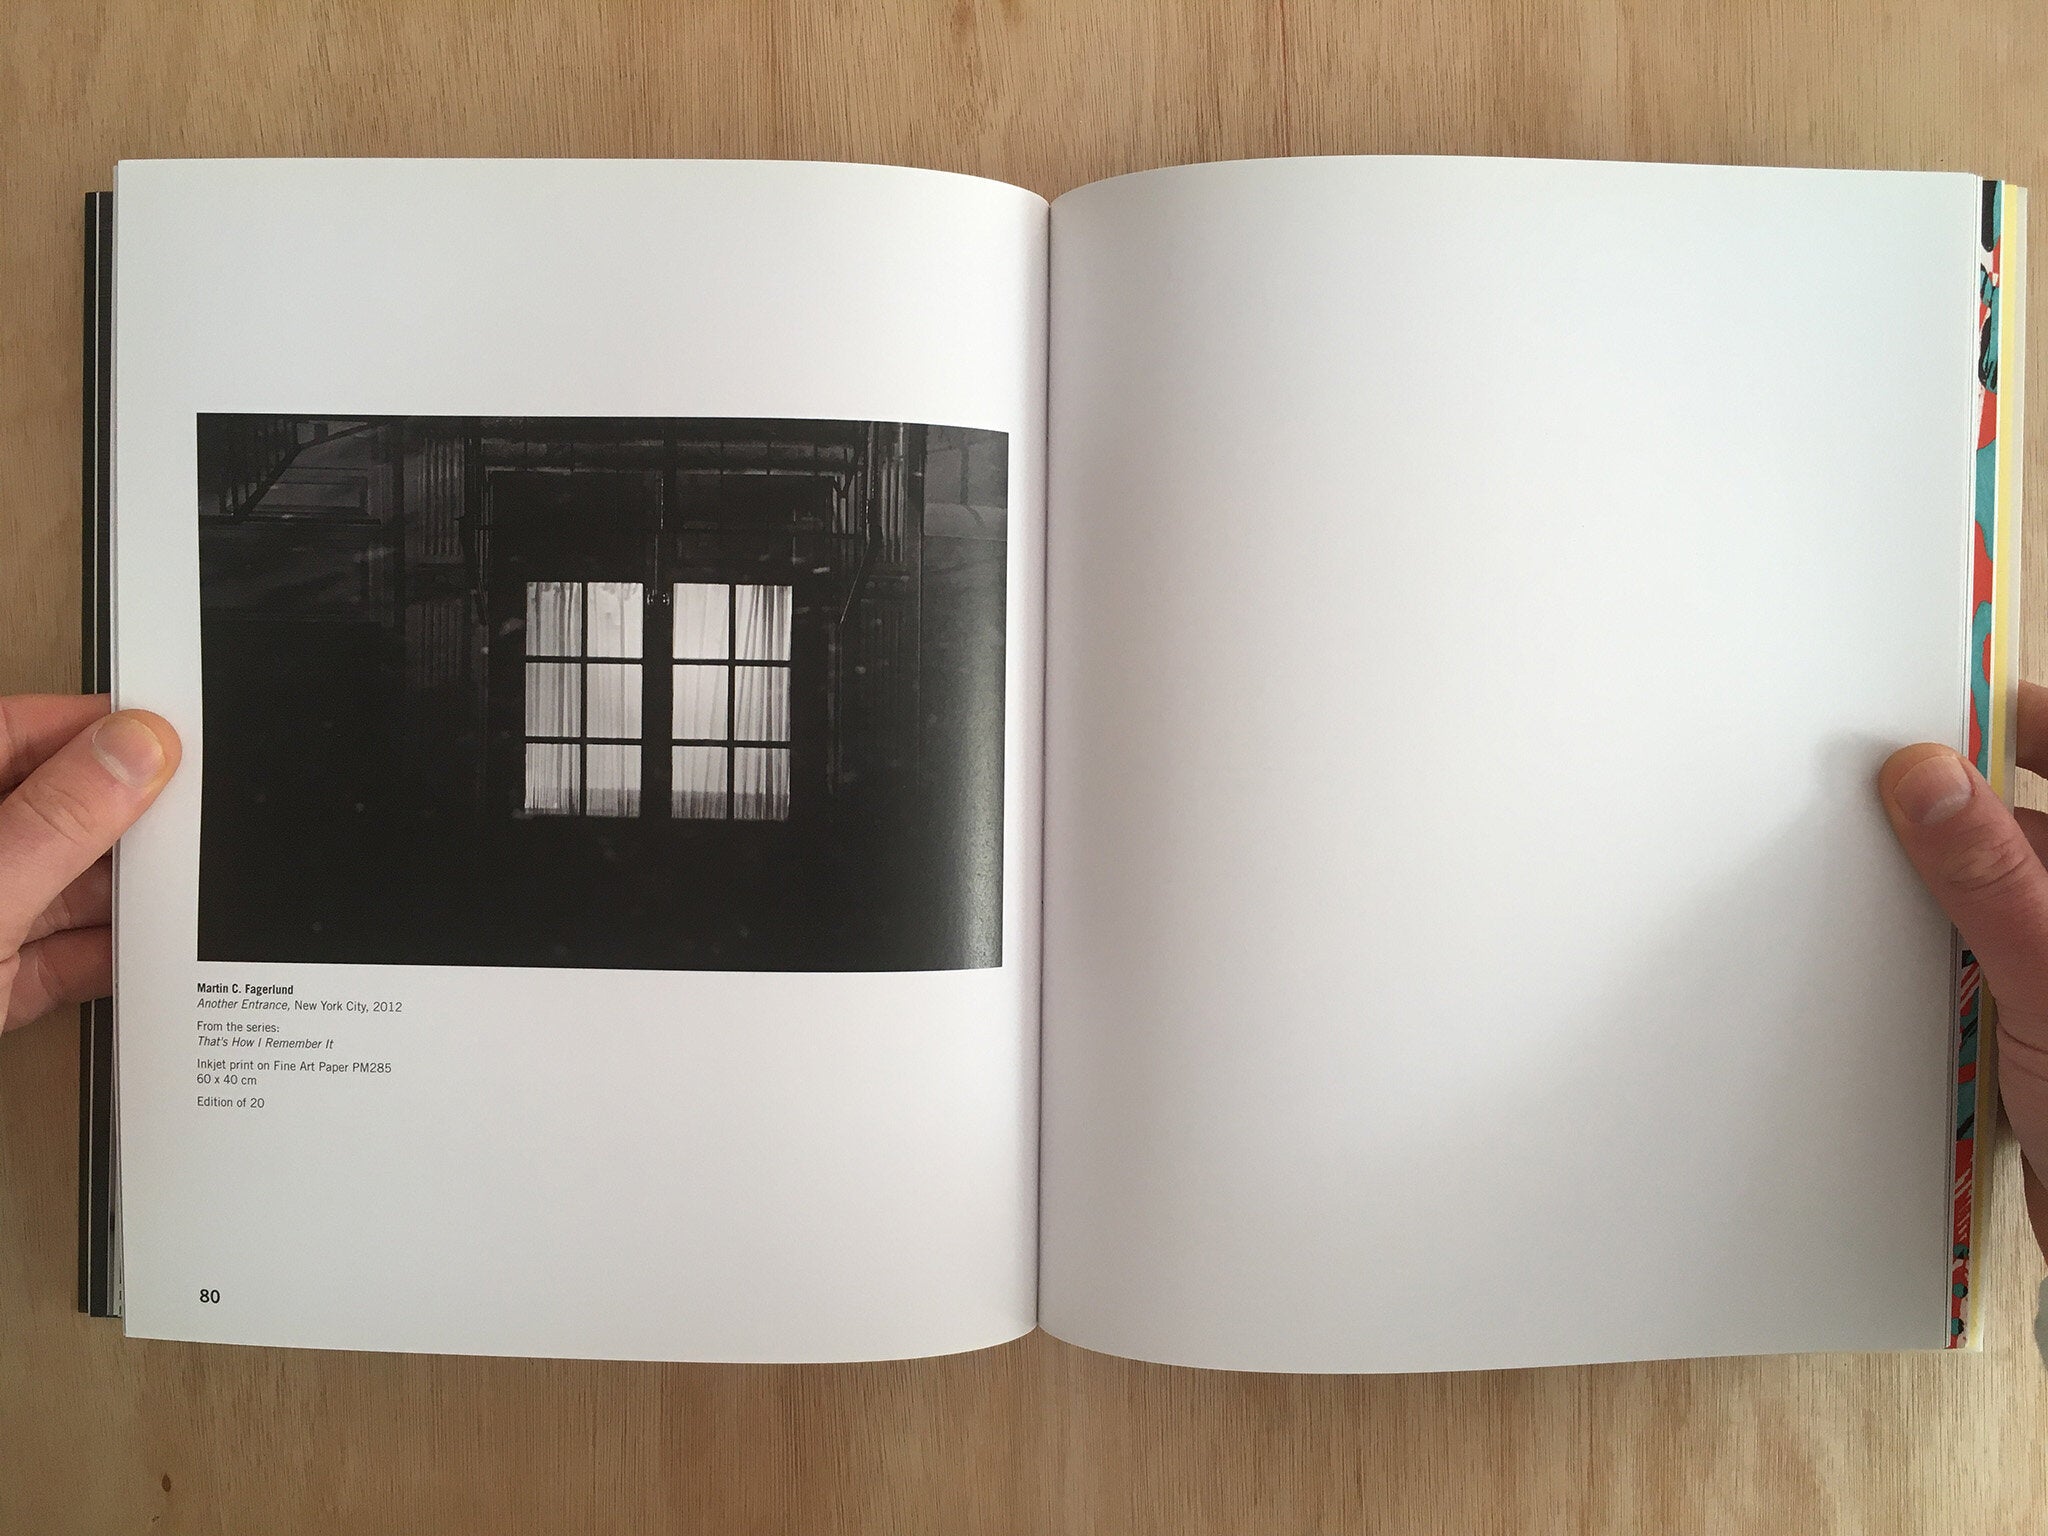 SOMEWHERE ELSE by Thomas Pålsson, Simon Rachwan, Martin C. Fagerlund and Martin Ransby